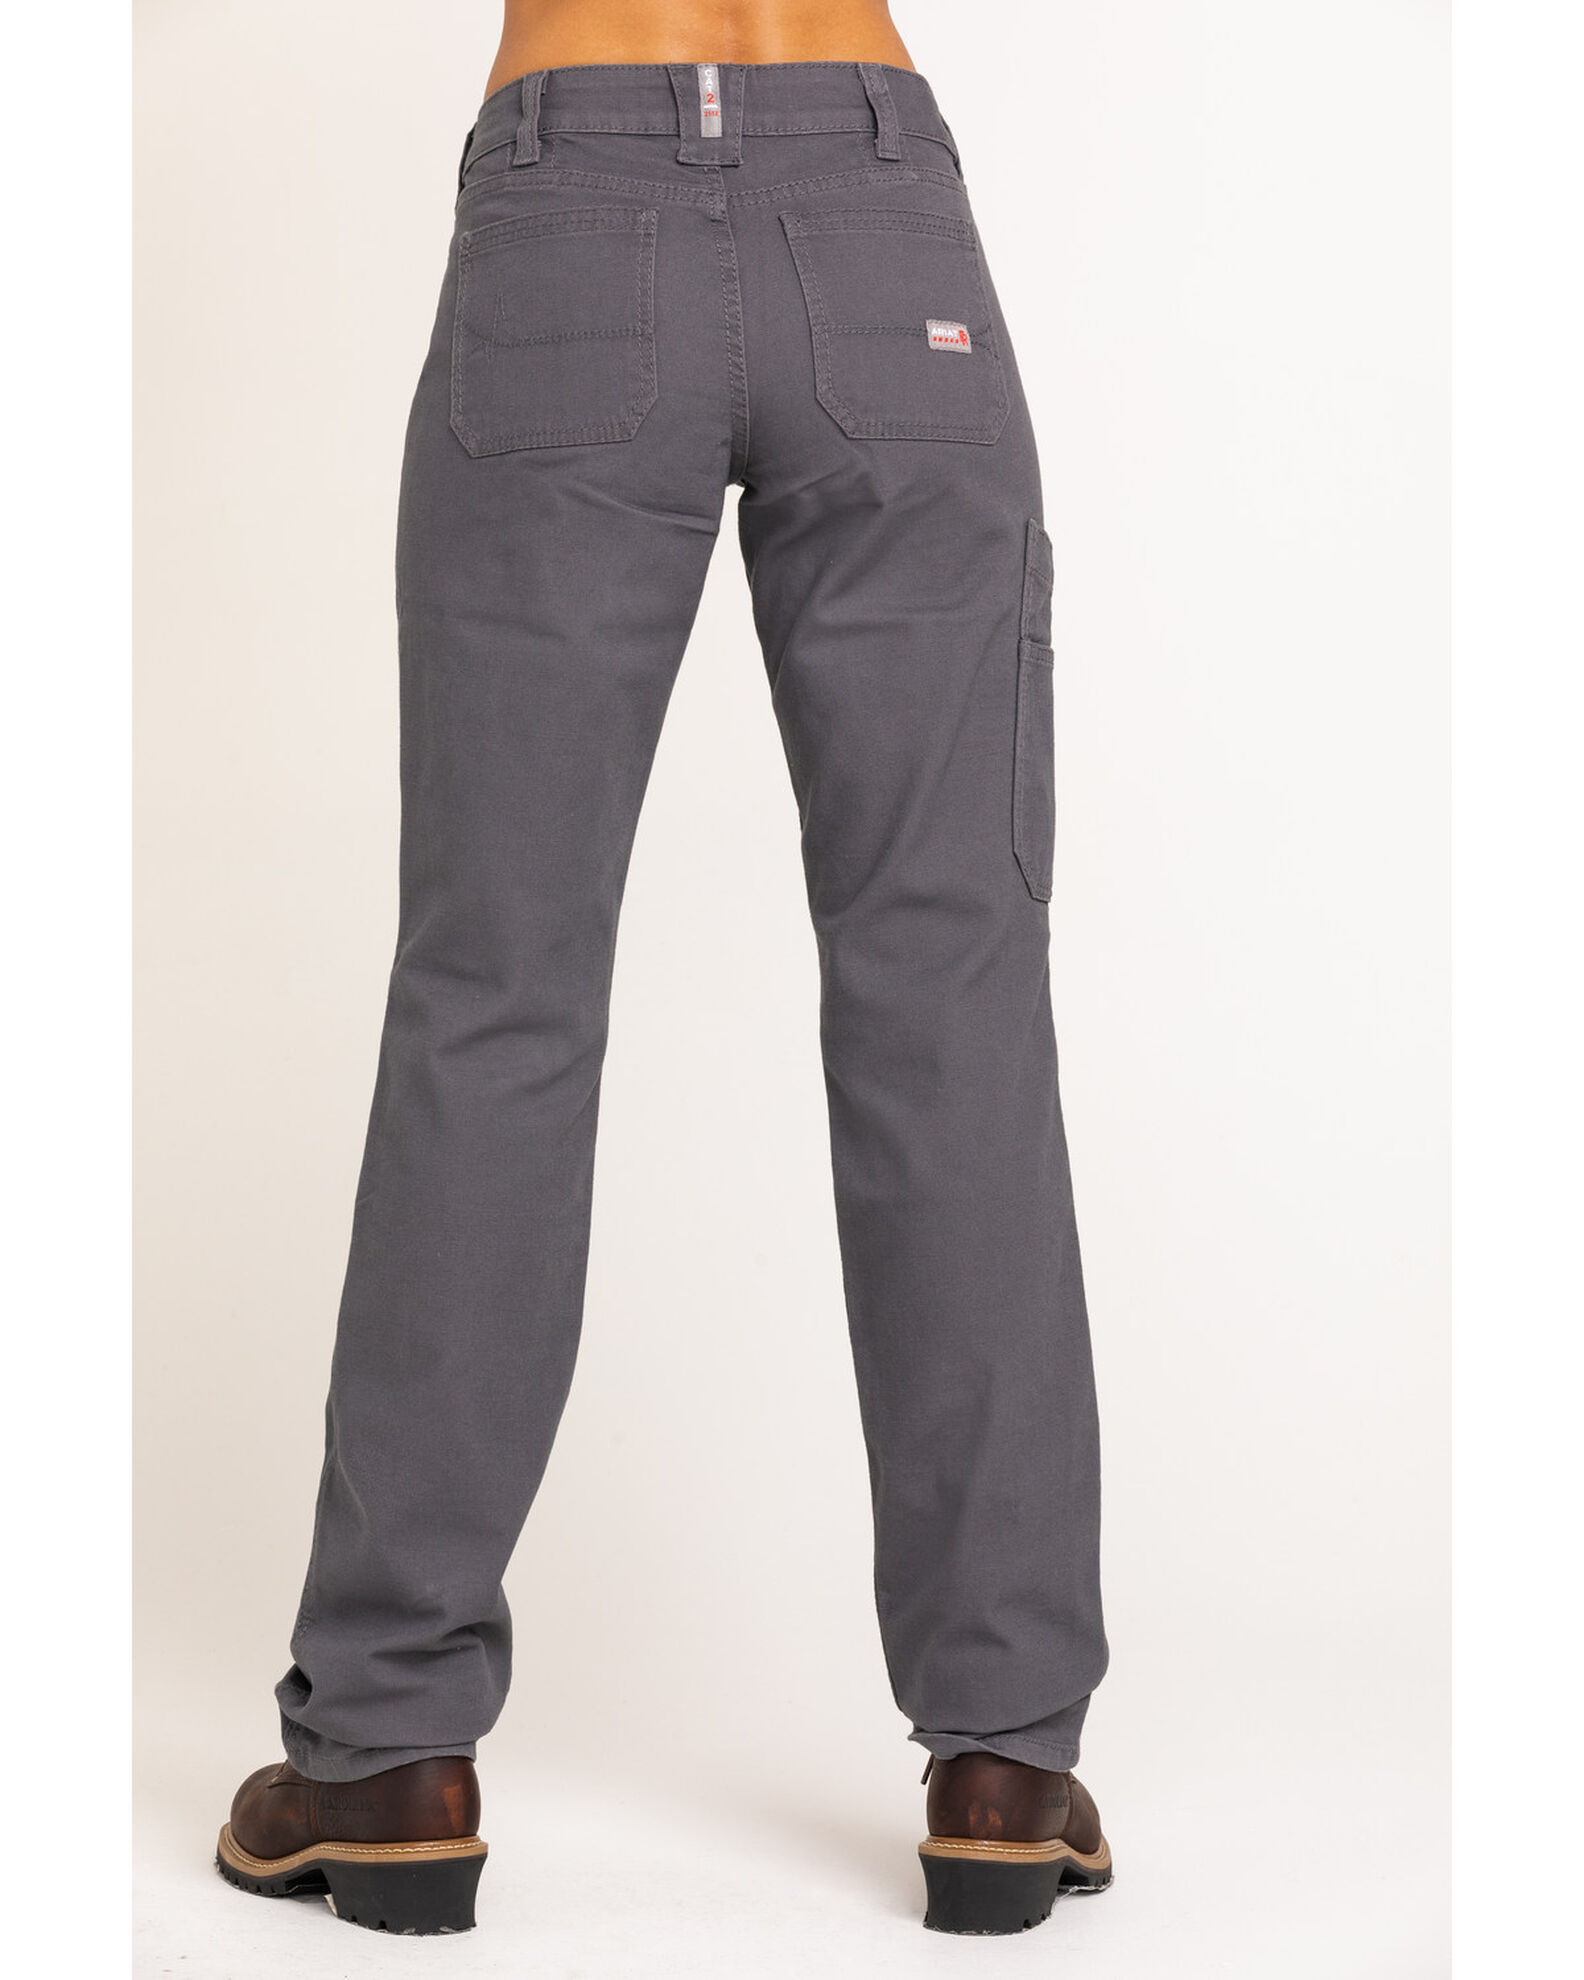 Product Name: Ariat Women's FR Duralight Stretch Canvas Straight Leg Pants